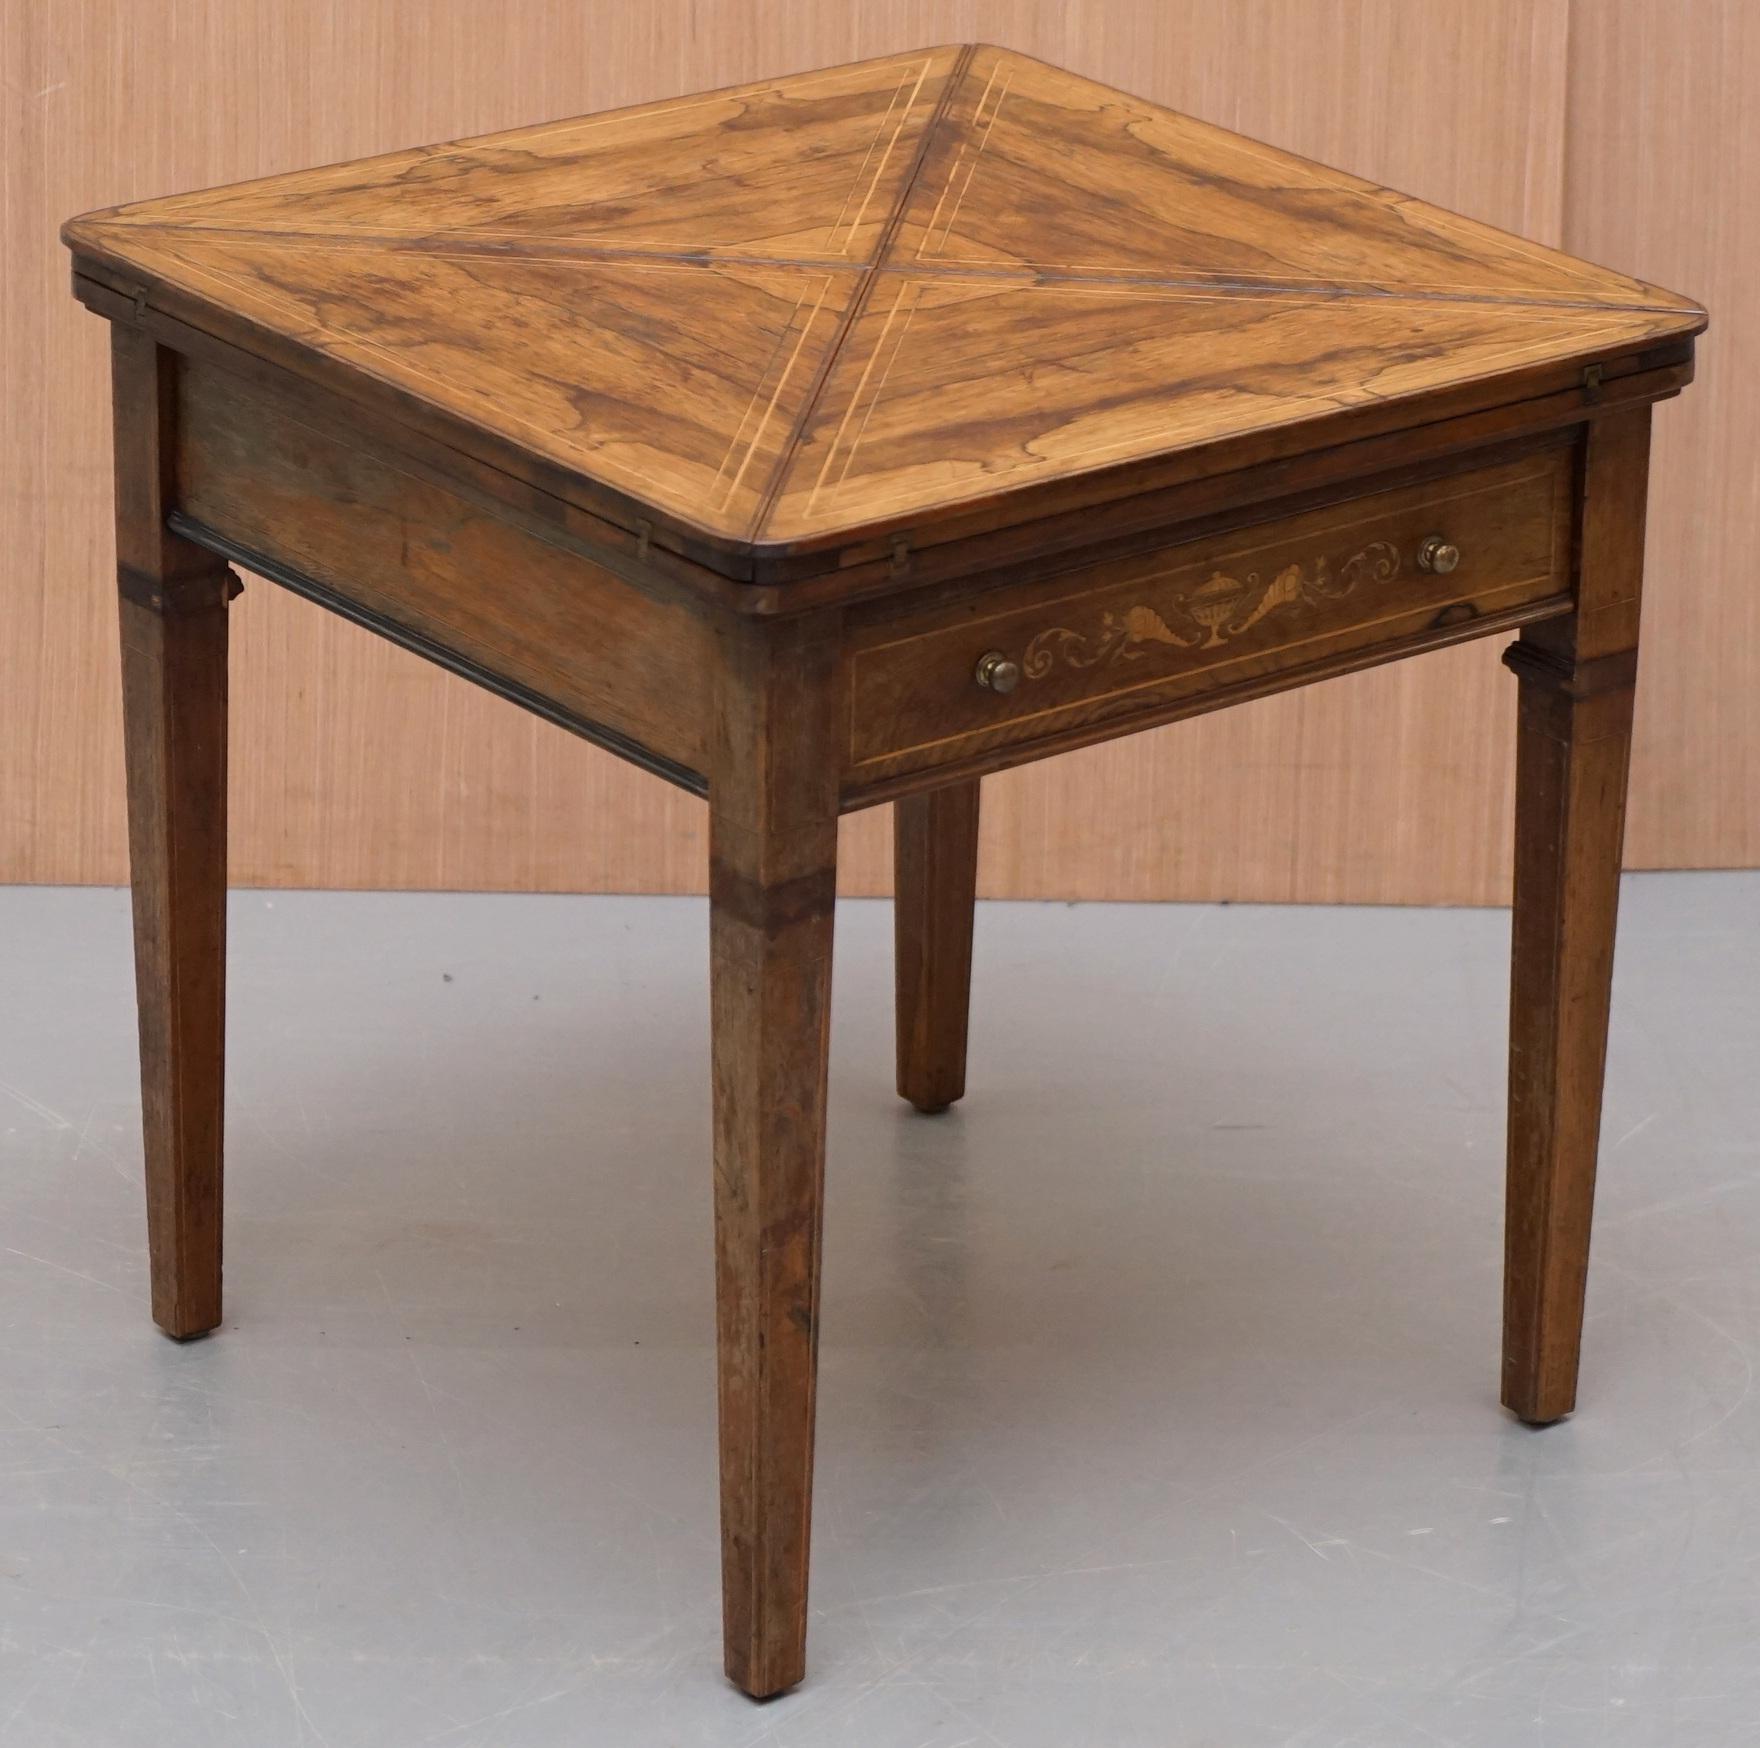 We are delighted to offer for sale this stunning and circa 1880 Victorian English rosewood games table 

A very well made Victorian table, its in rosewood with a baise lining on the inside. I've not seen one in rosewood before, the timber has a